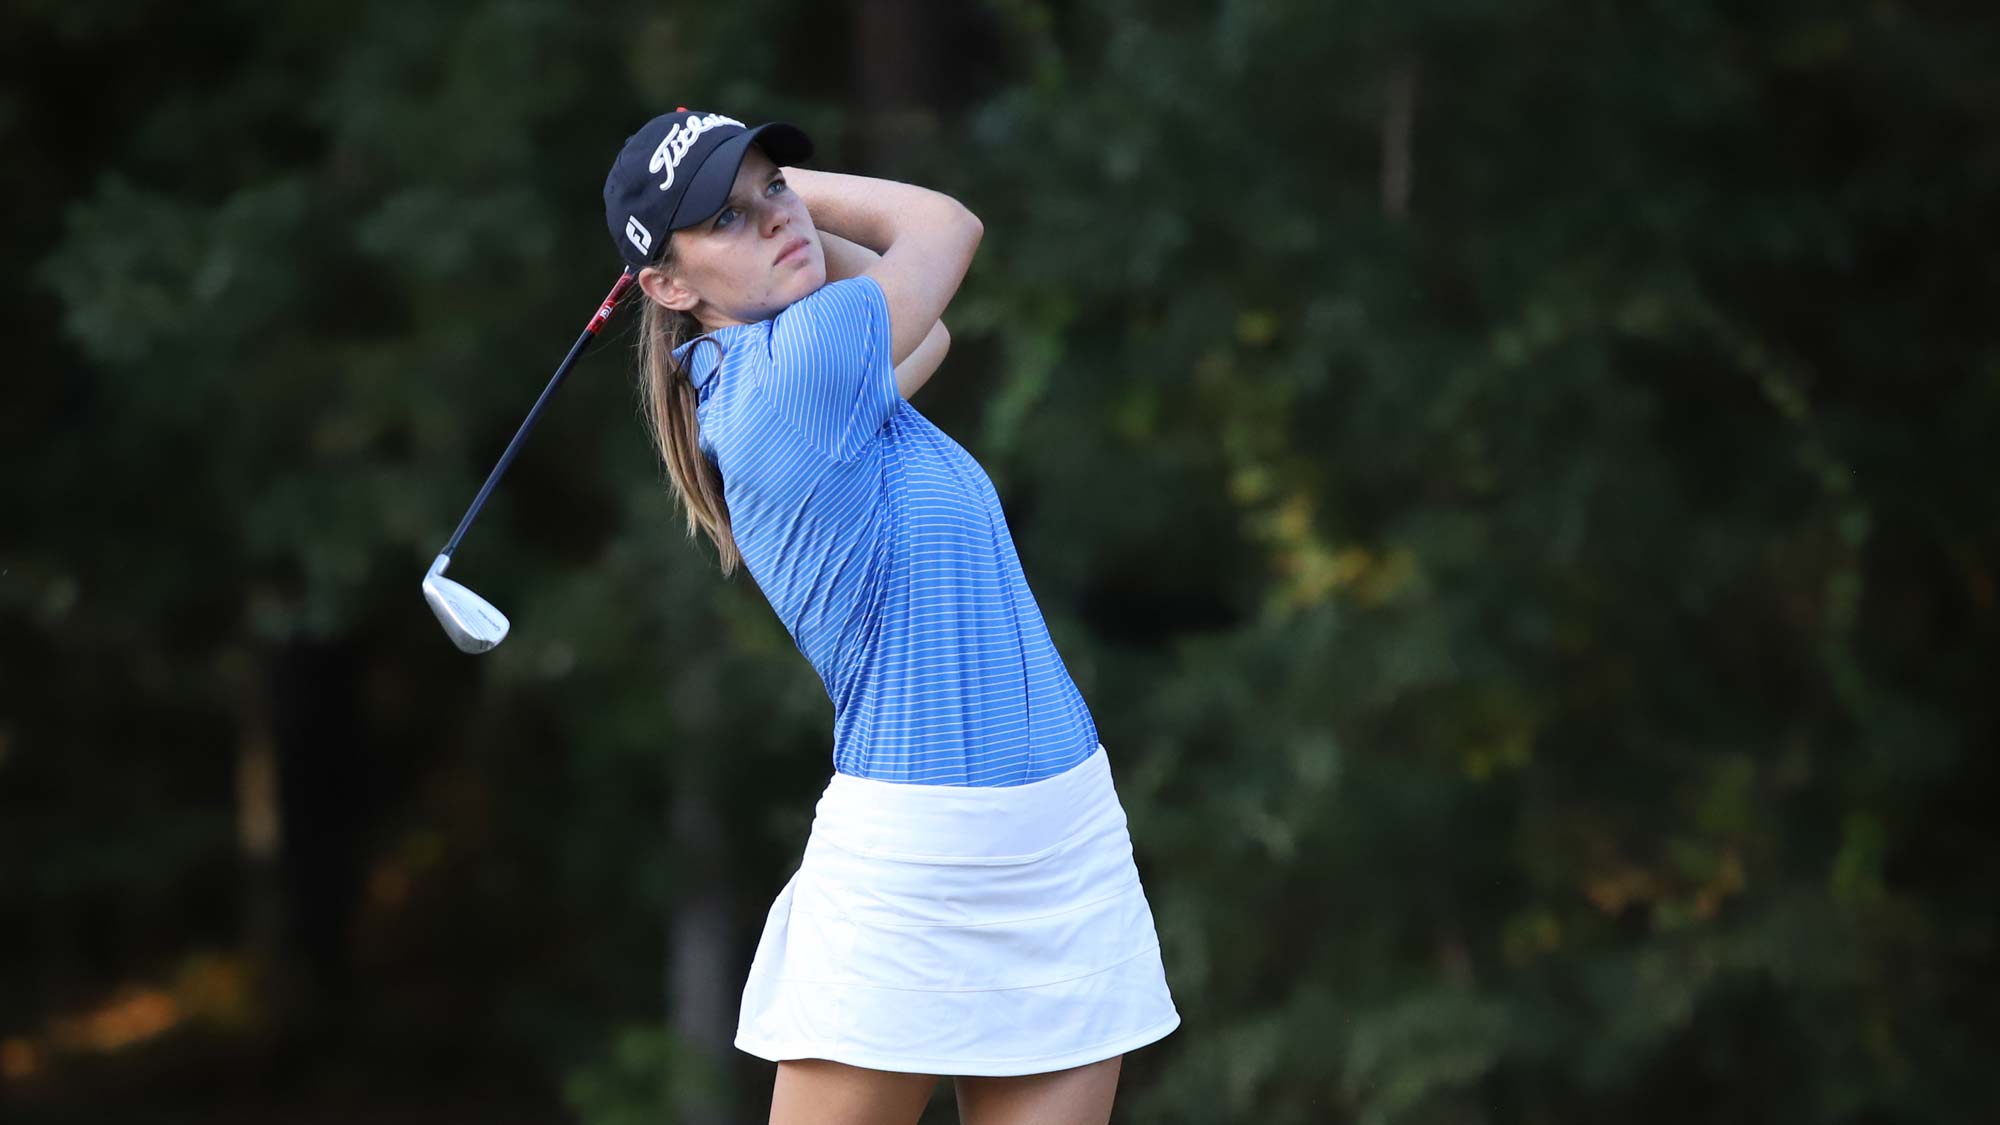 Sarah Schmelzel during the fifth round of the LPGA Q-Series